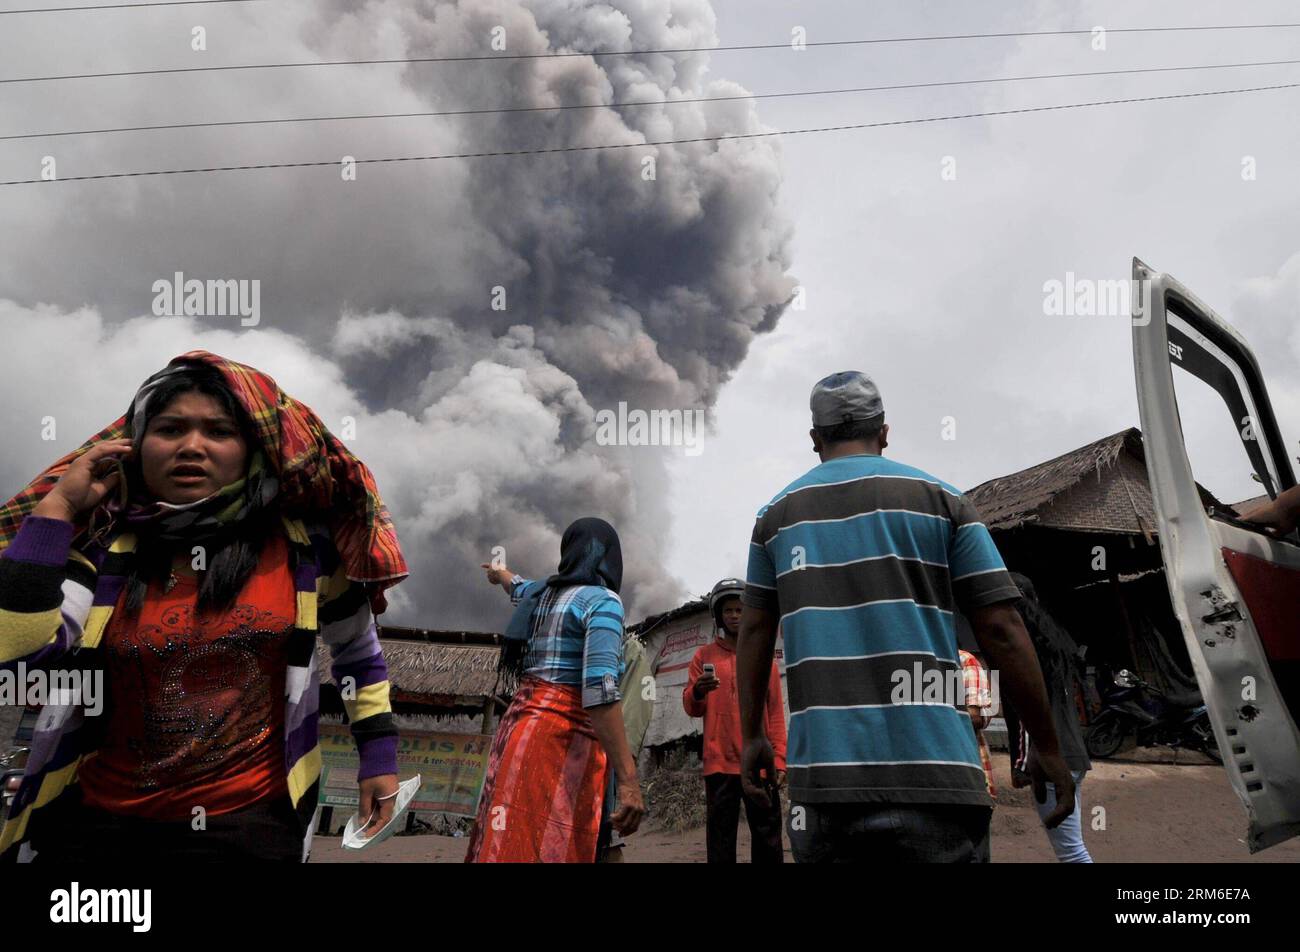 (140107) -- NORTH SUMATRA, Jan. 7, 2014. (Xinhua) -- People watch as the Mount Sinabung spews volcanic materials during an eruption in North Sumatra, Indonesia, Jan. 7, 2014. Over 21,800 people sought refuge at 33 shelters in Karo district of North Sumatra province as the Sinabung volcano continued to spew ash and lava on Monday, an Indonesian official said. (Xinhua/Agung Kuncahya B.) INDONESIA-NORTH SUMATRA-MOUNT SINABUNG-ERUPTION PUBLICATIONxNOTxINxCHN   North Sumatra Jan 7 2014 XINHUA Celebrities Watch As The Mount Sinabung spews Volcanic Material during to Eruption in North Sumatra Indones Stock Photo